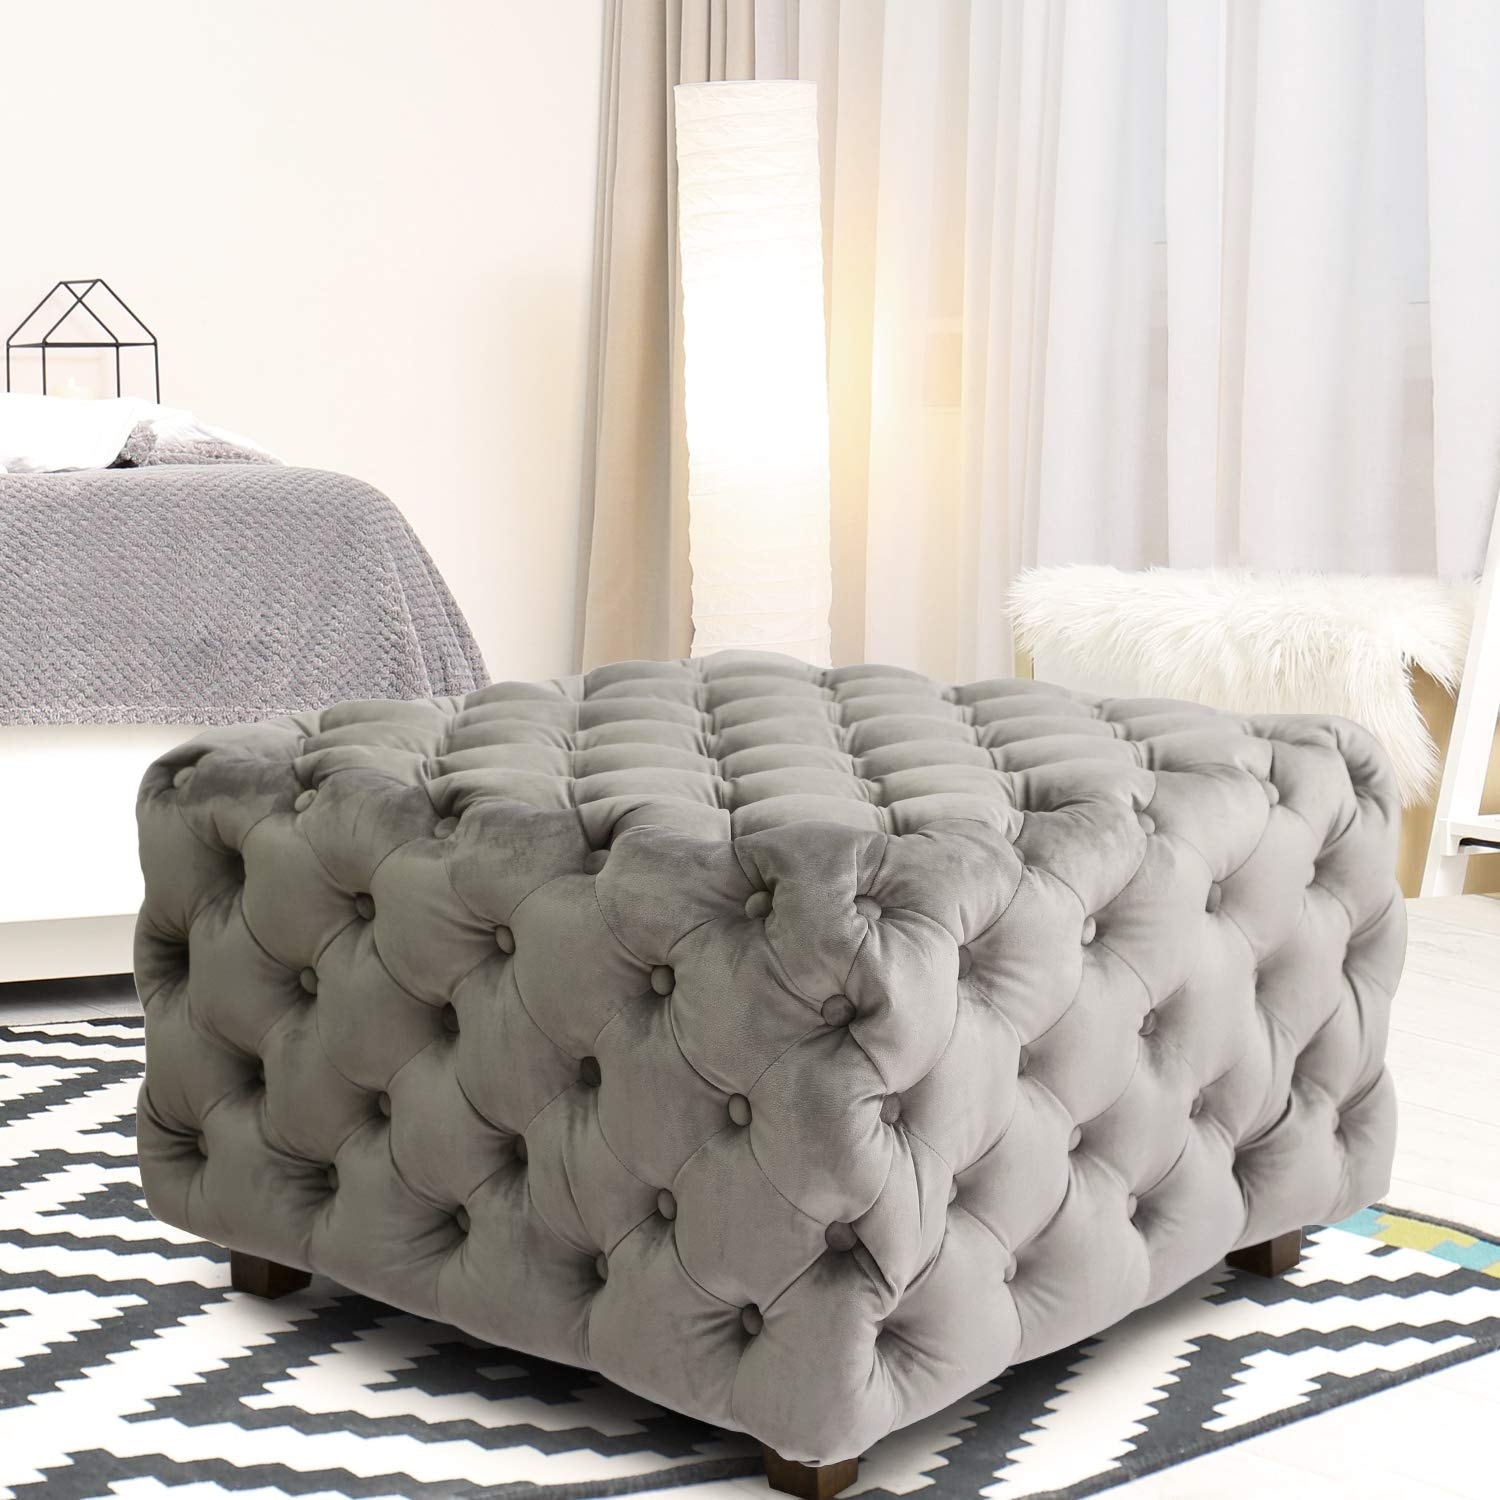 Adeco 15'' Small Ottoman Upholstered Foot Rest - Bed Bath & Beyond